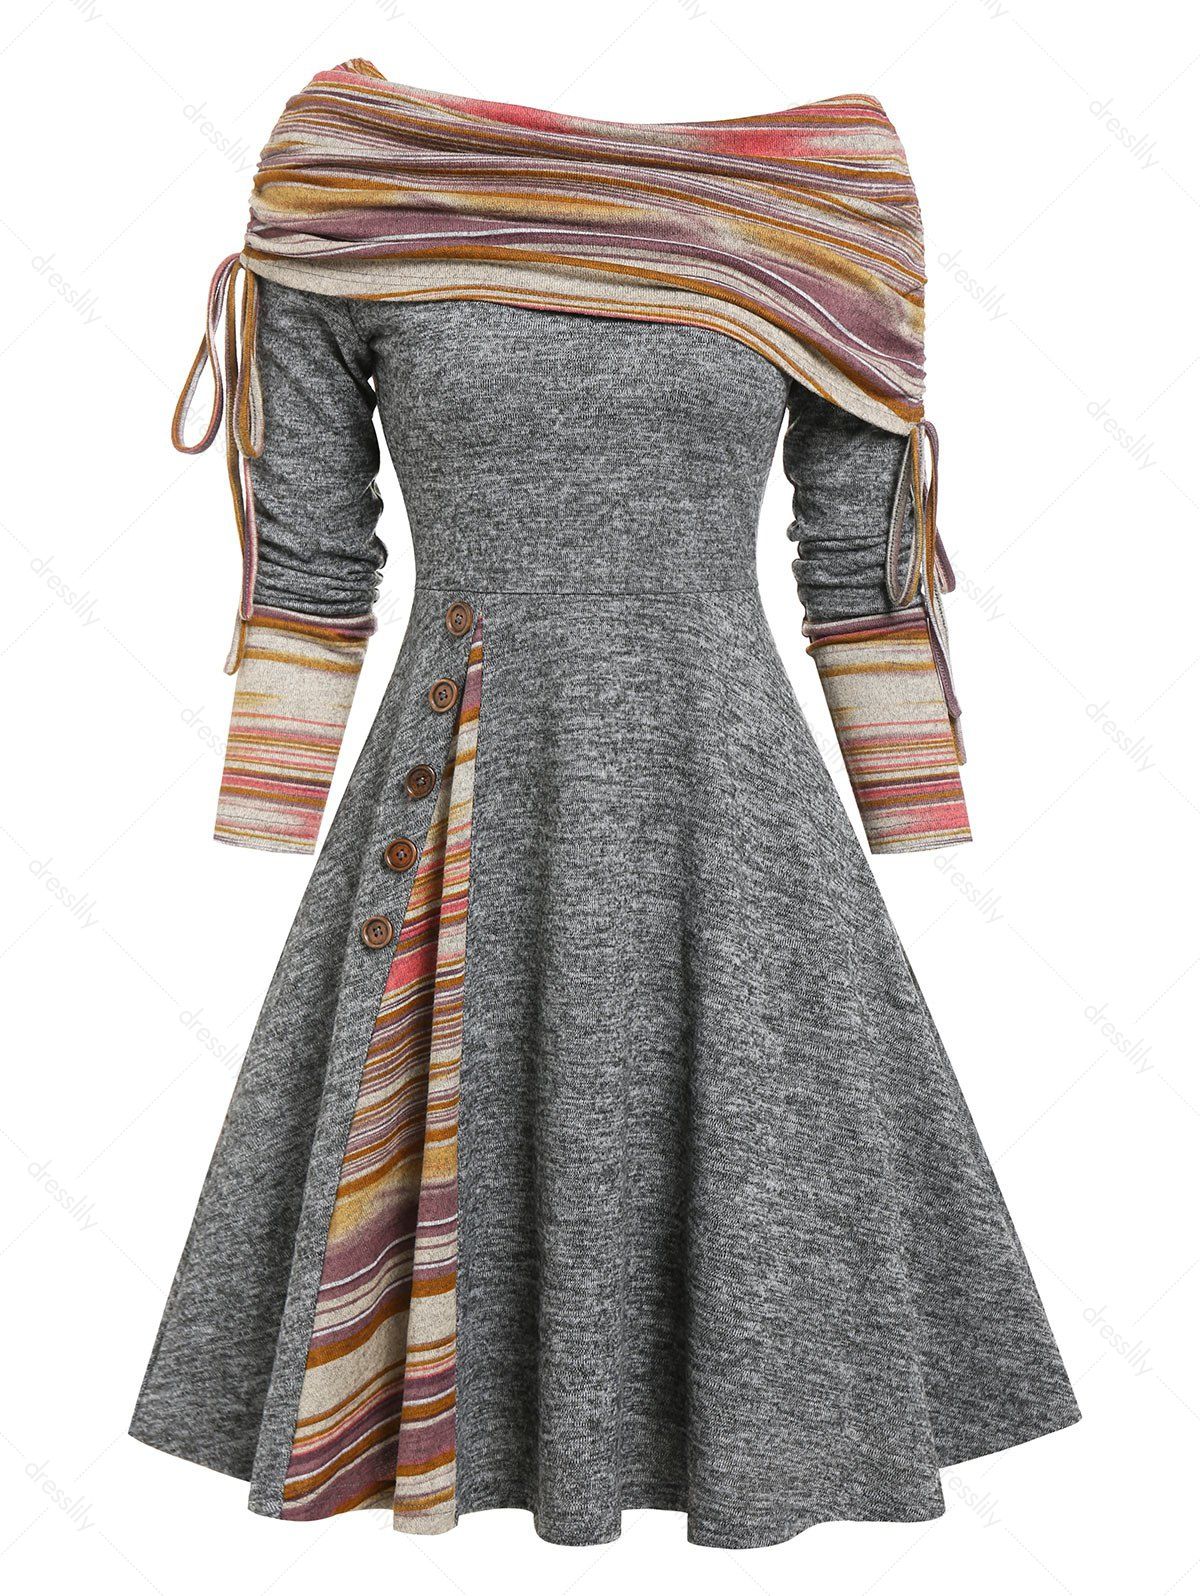 Convertible Neck Cinched Striped Flare Dress - LIGHT GRAY S